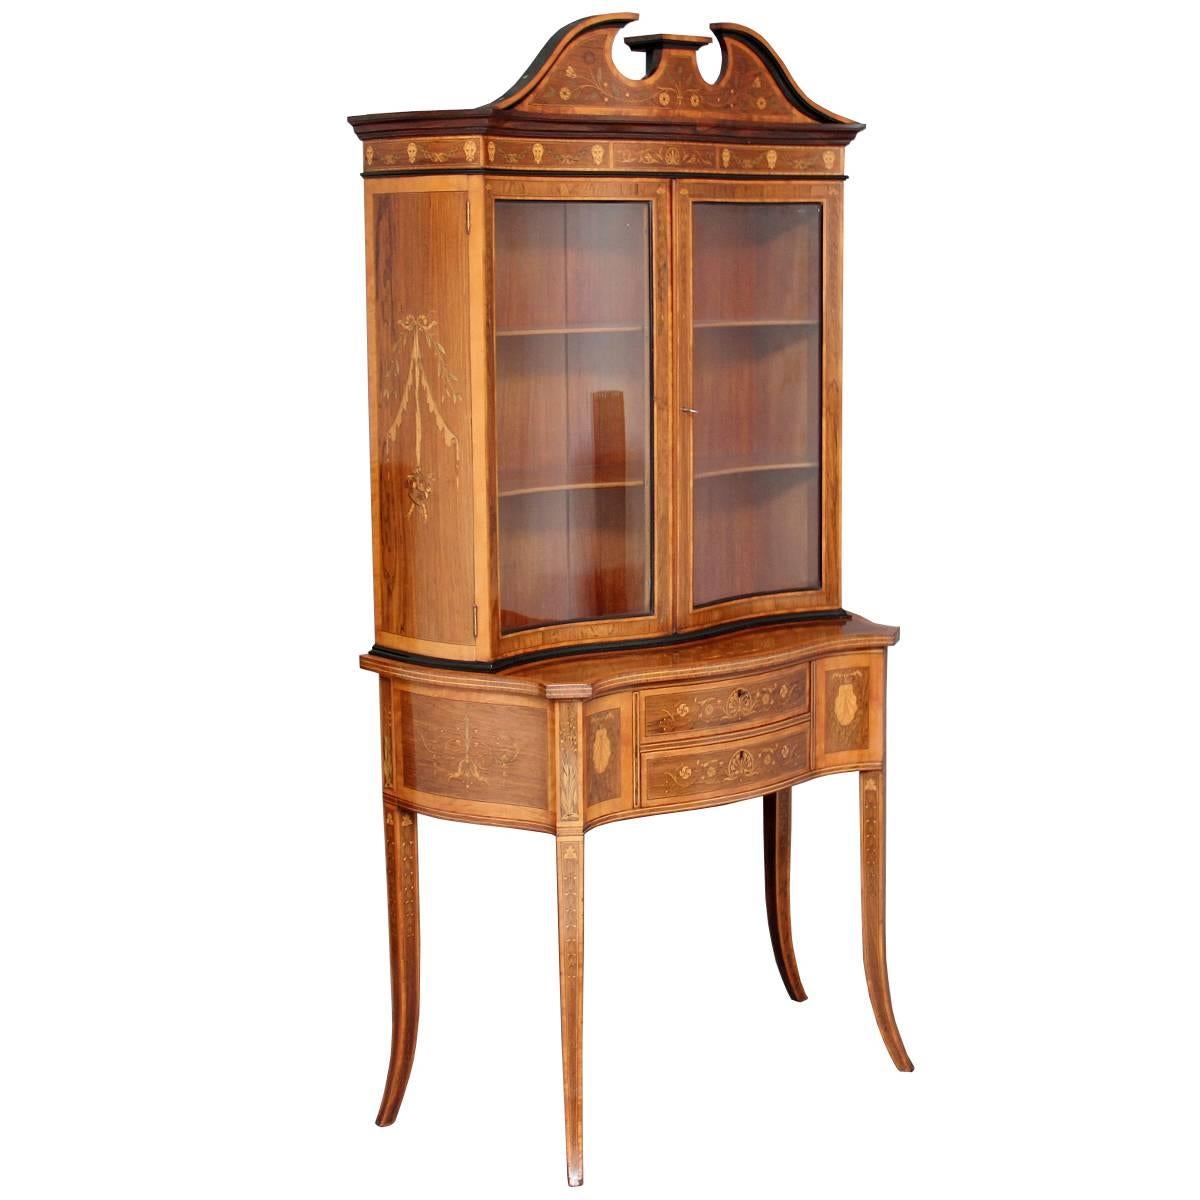 19th Century Sheraton Revival Inlaid Rosewood Display Cabinet